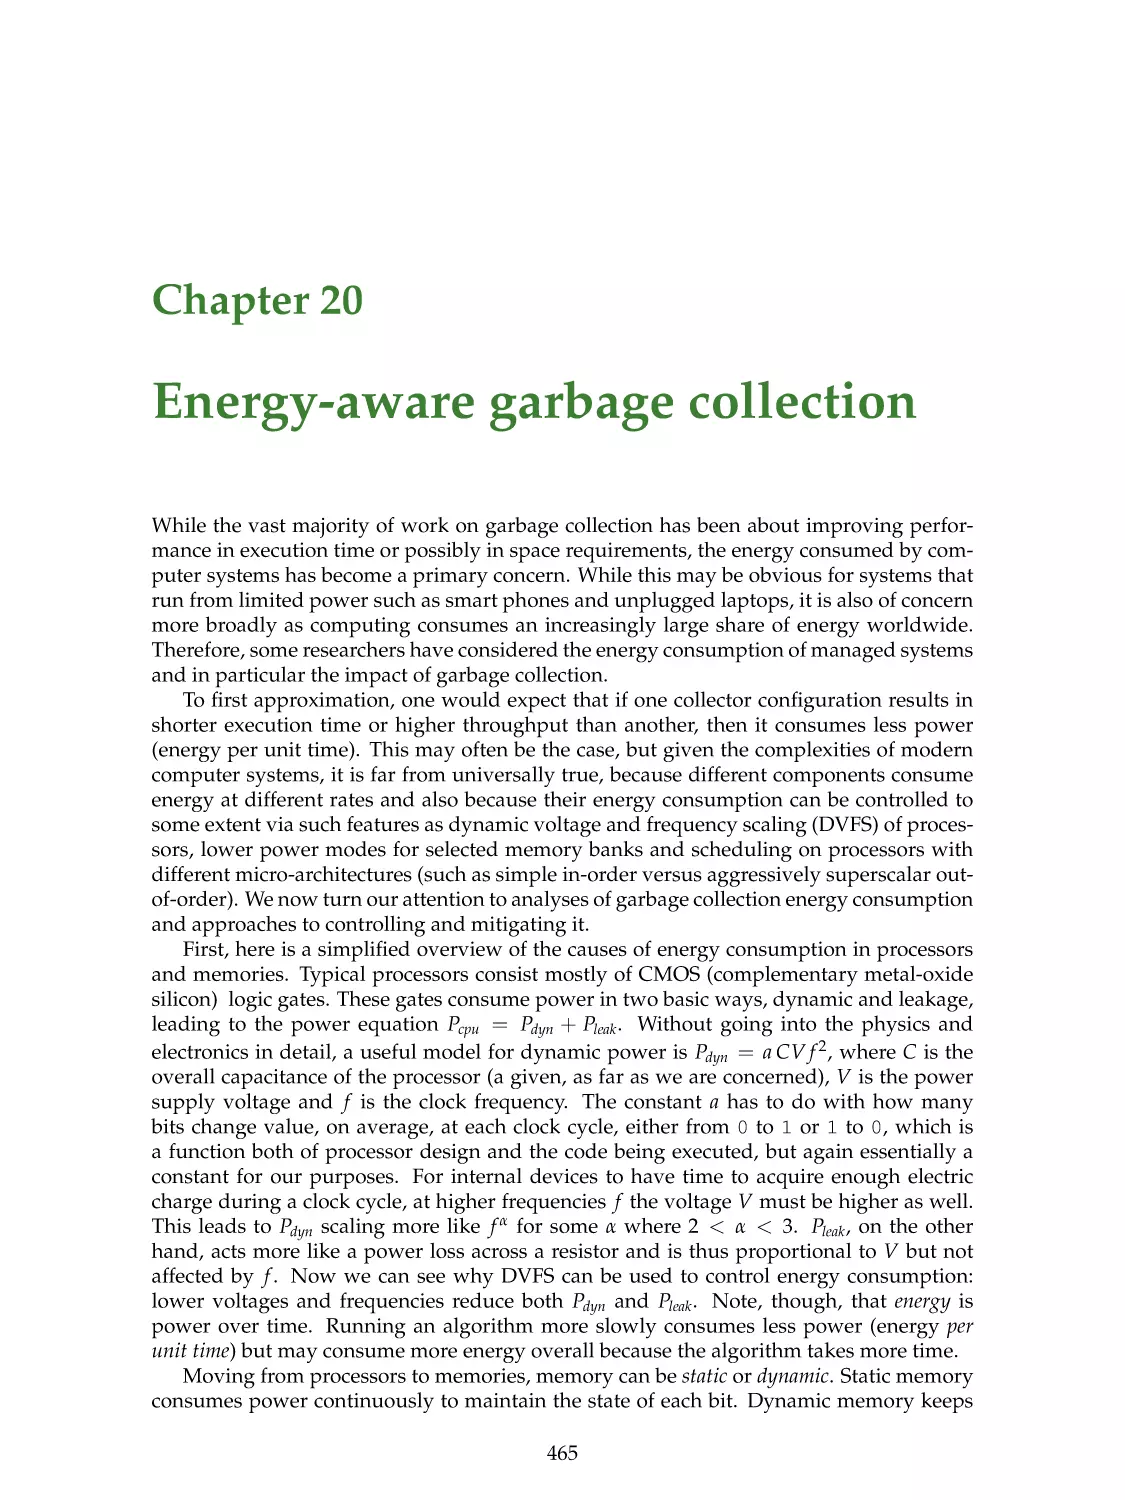 20. Energy-aware garbage collection